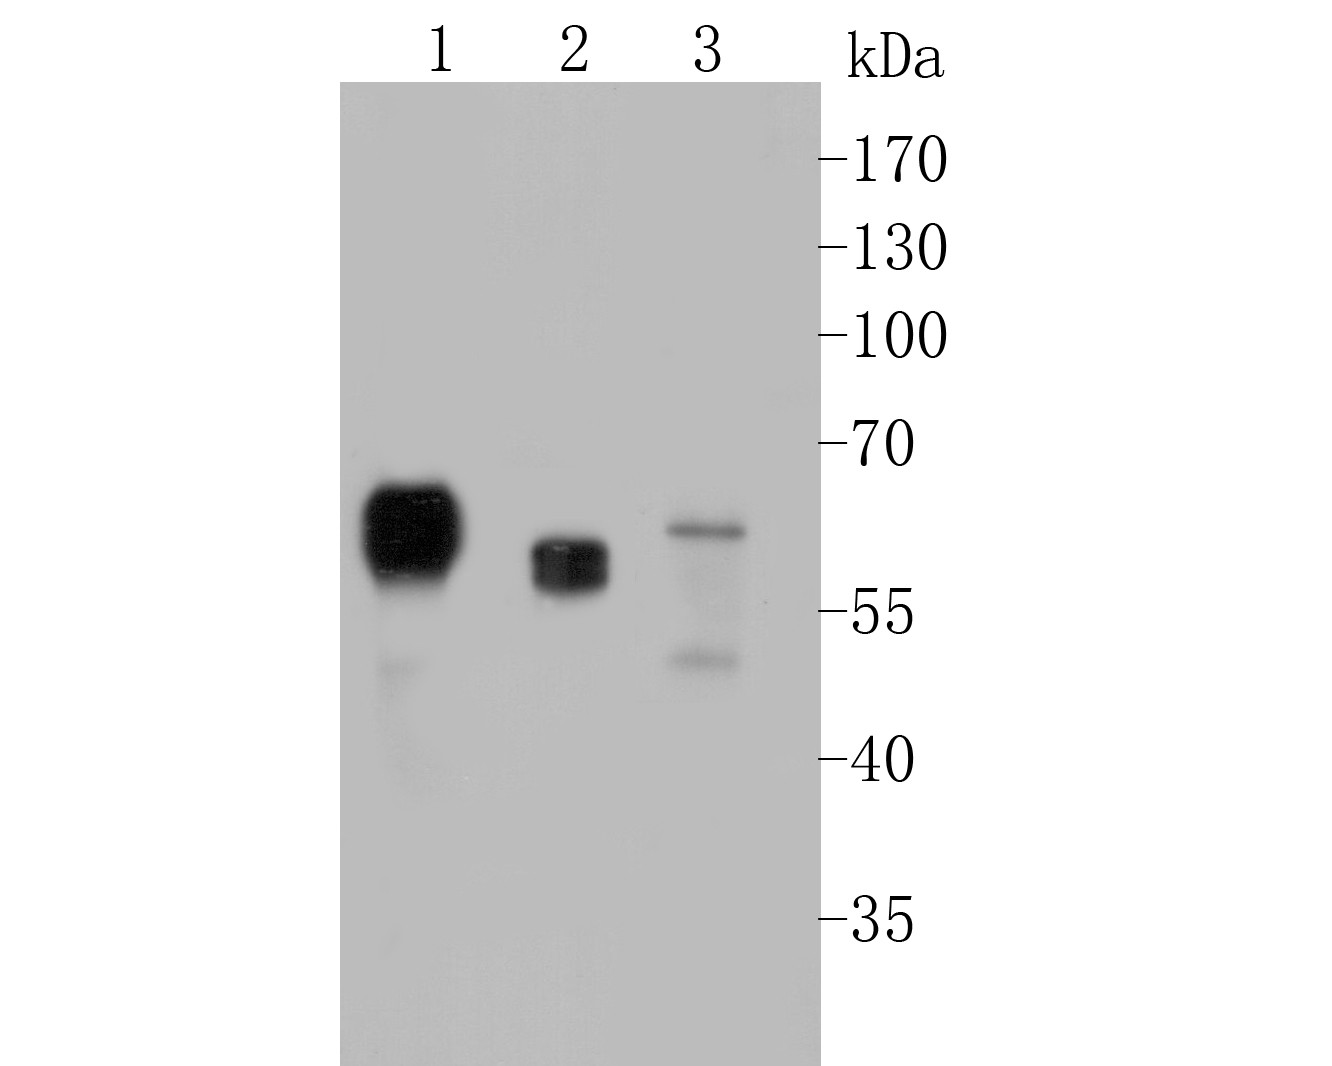 Western blot analysis of SERPINC1 on different lysates. Proteins were transferred to a PVDF membrane and blocked with 5% BSA in PBS for 1 hour at room temperature. The primary antibody (EM1901-11, 1/500) was used in 5% BSA at room temperature for 2 hours. Goat Anti-Mouse IgG - HRP Secondary Antibody (HA1006) at 1:5,000 dilution was used for 1 hour at room temperature.<br />
Positive control: <br />
Lane 1: HepG2 cell lysate<br />
Lane 2: SiHa cell lysate<br />
Lane 3: U937 cell lysate